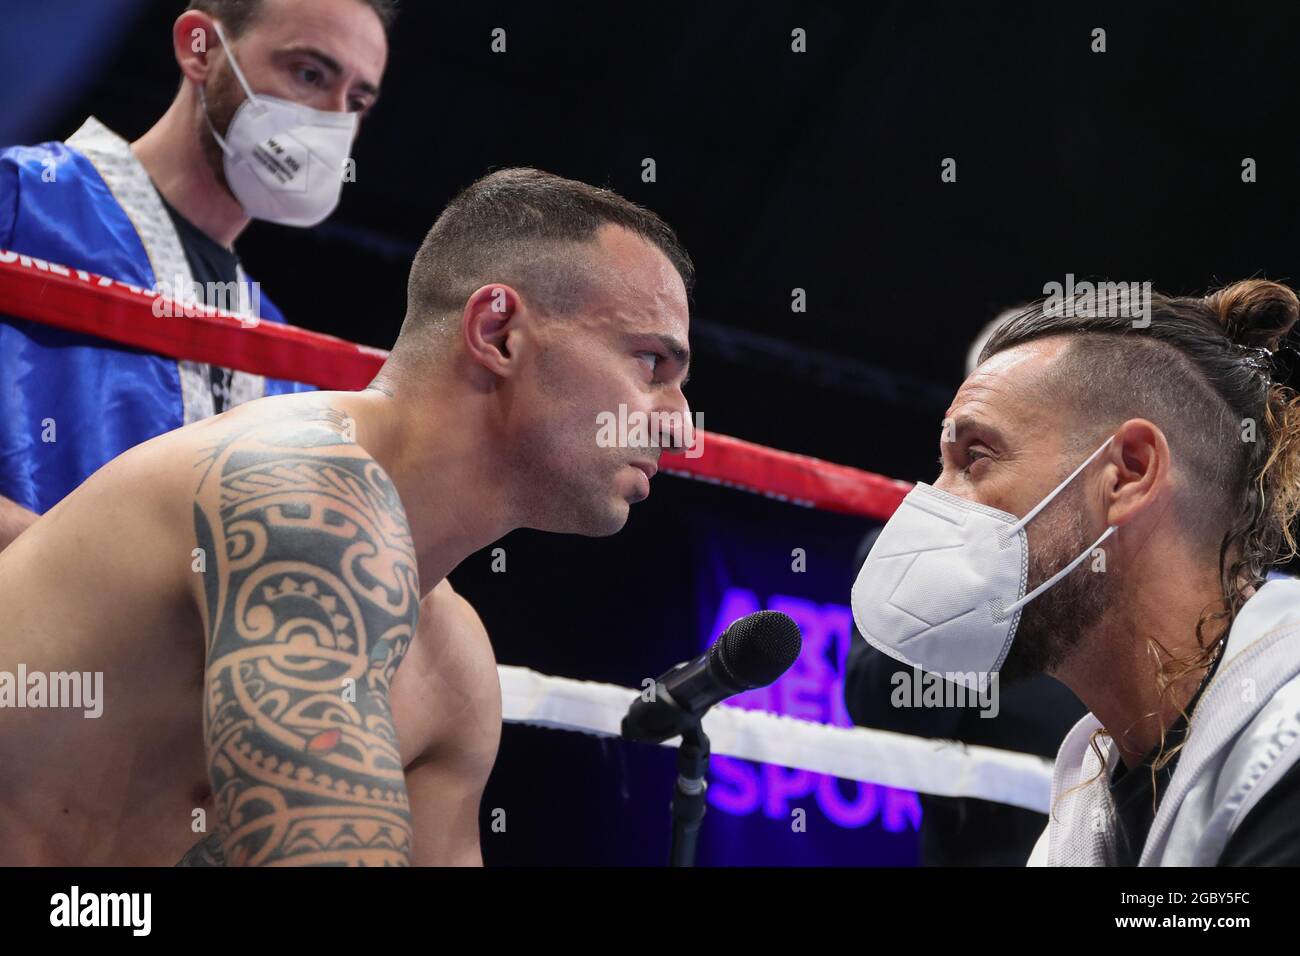 BRESCIA, ITALY - MAY 15: Nicola Henchiri exchange punches during their fight for the EU super featherweight title at the Mario Rigamonti Sport Center on May 15, 2021 in Brescia, Italy.  Credit: Stefano Nicoli/Speed Media/Alamy Live News Stock Photo